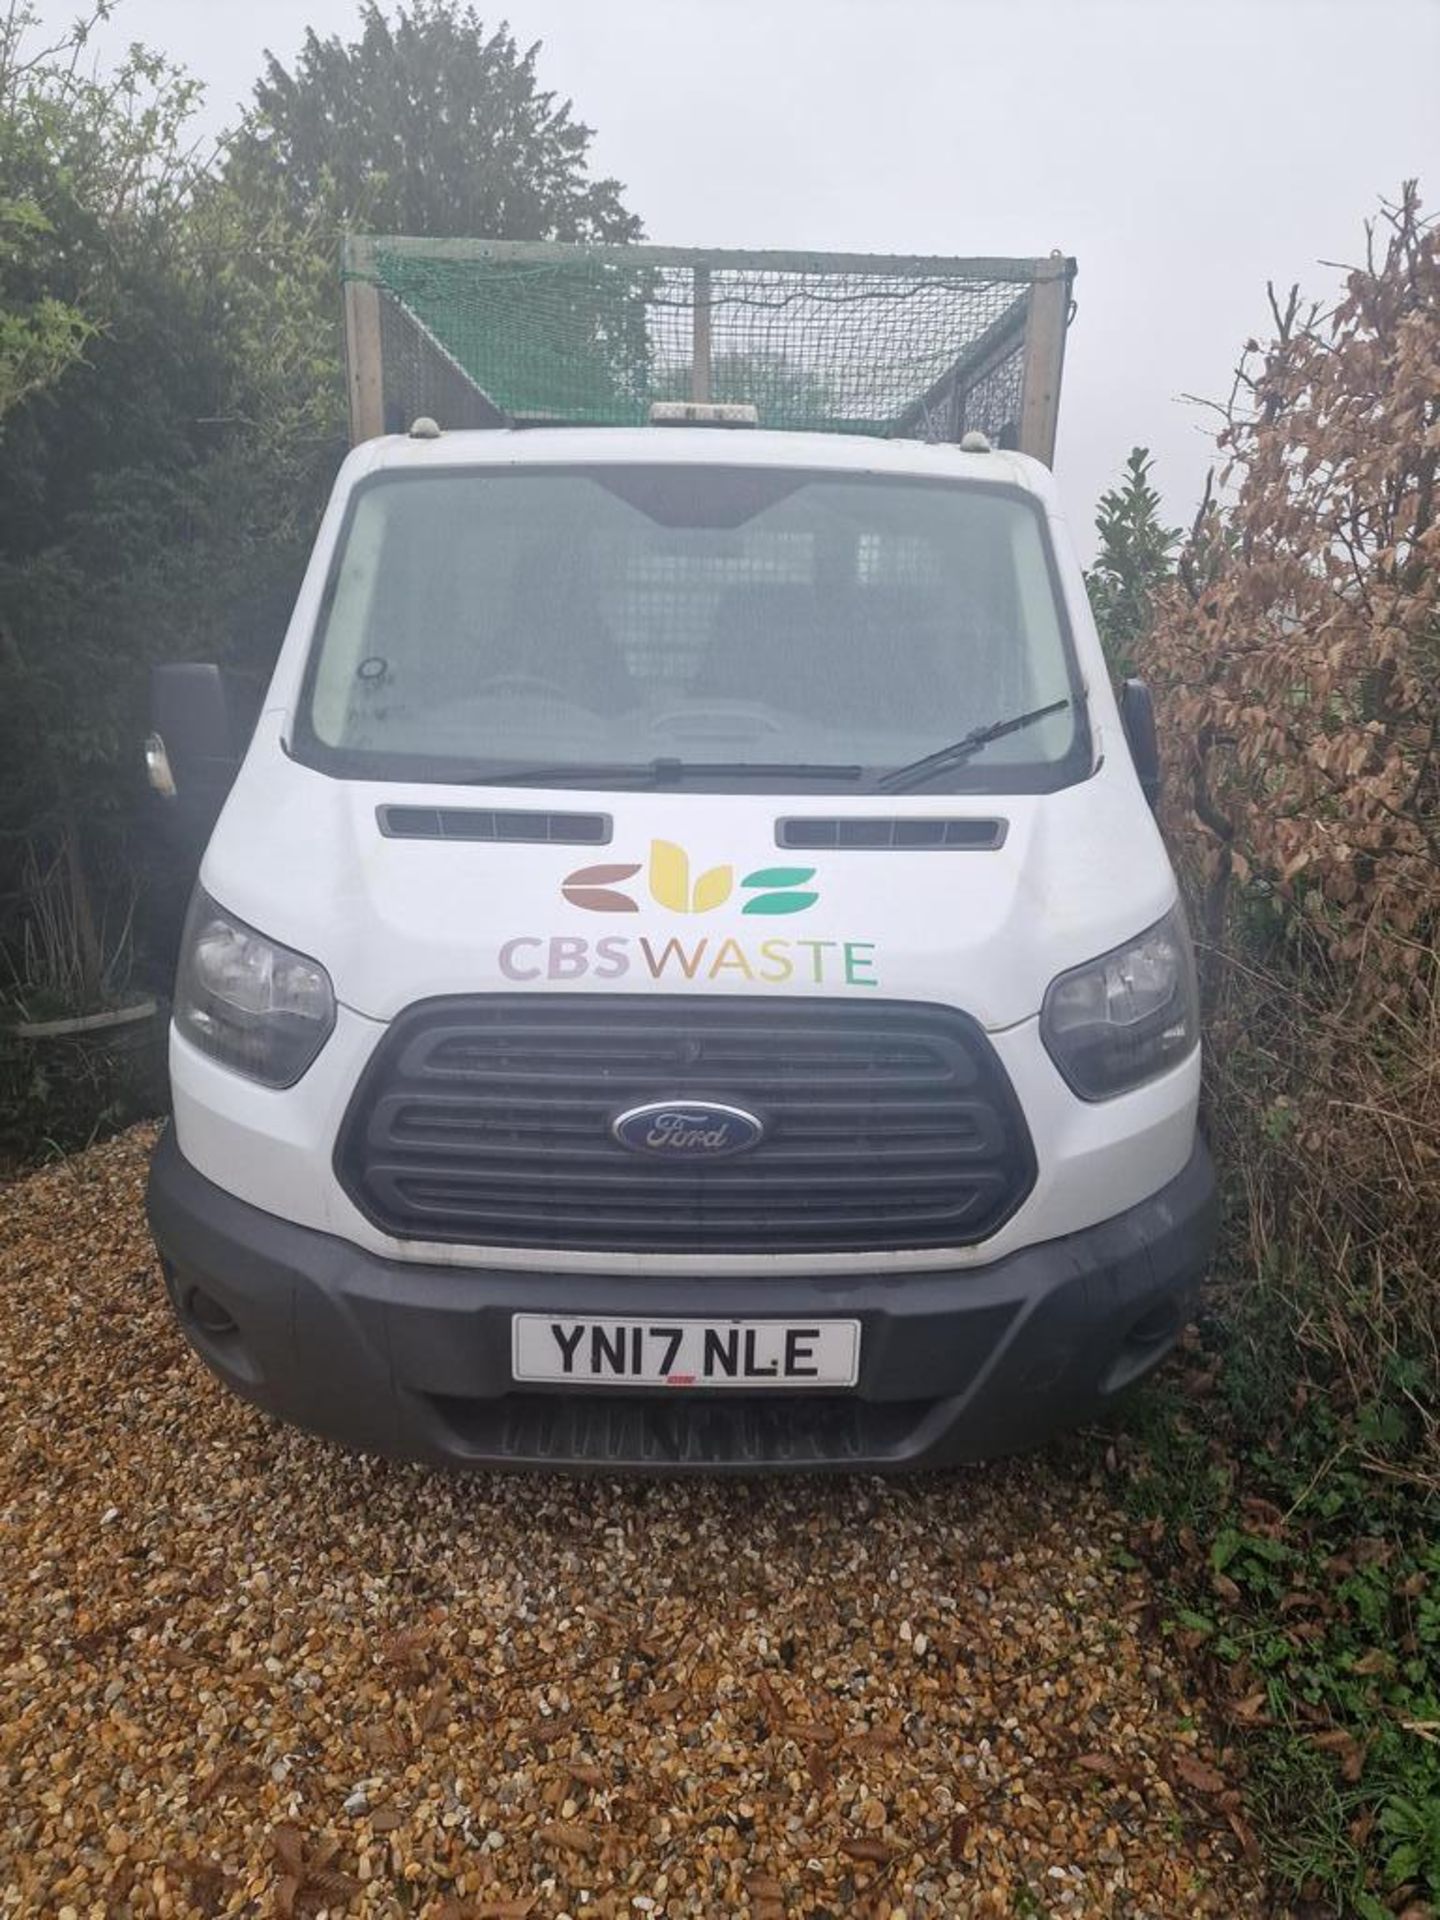 [YN17 NLE] Ford Transit 350 Tipper (White) - Image 2 of 9